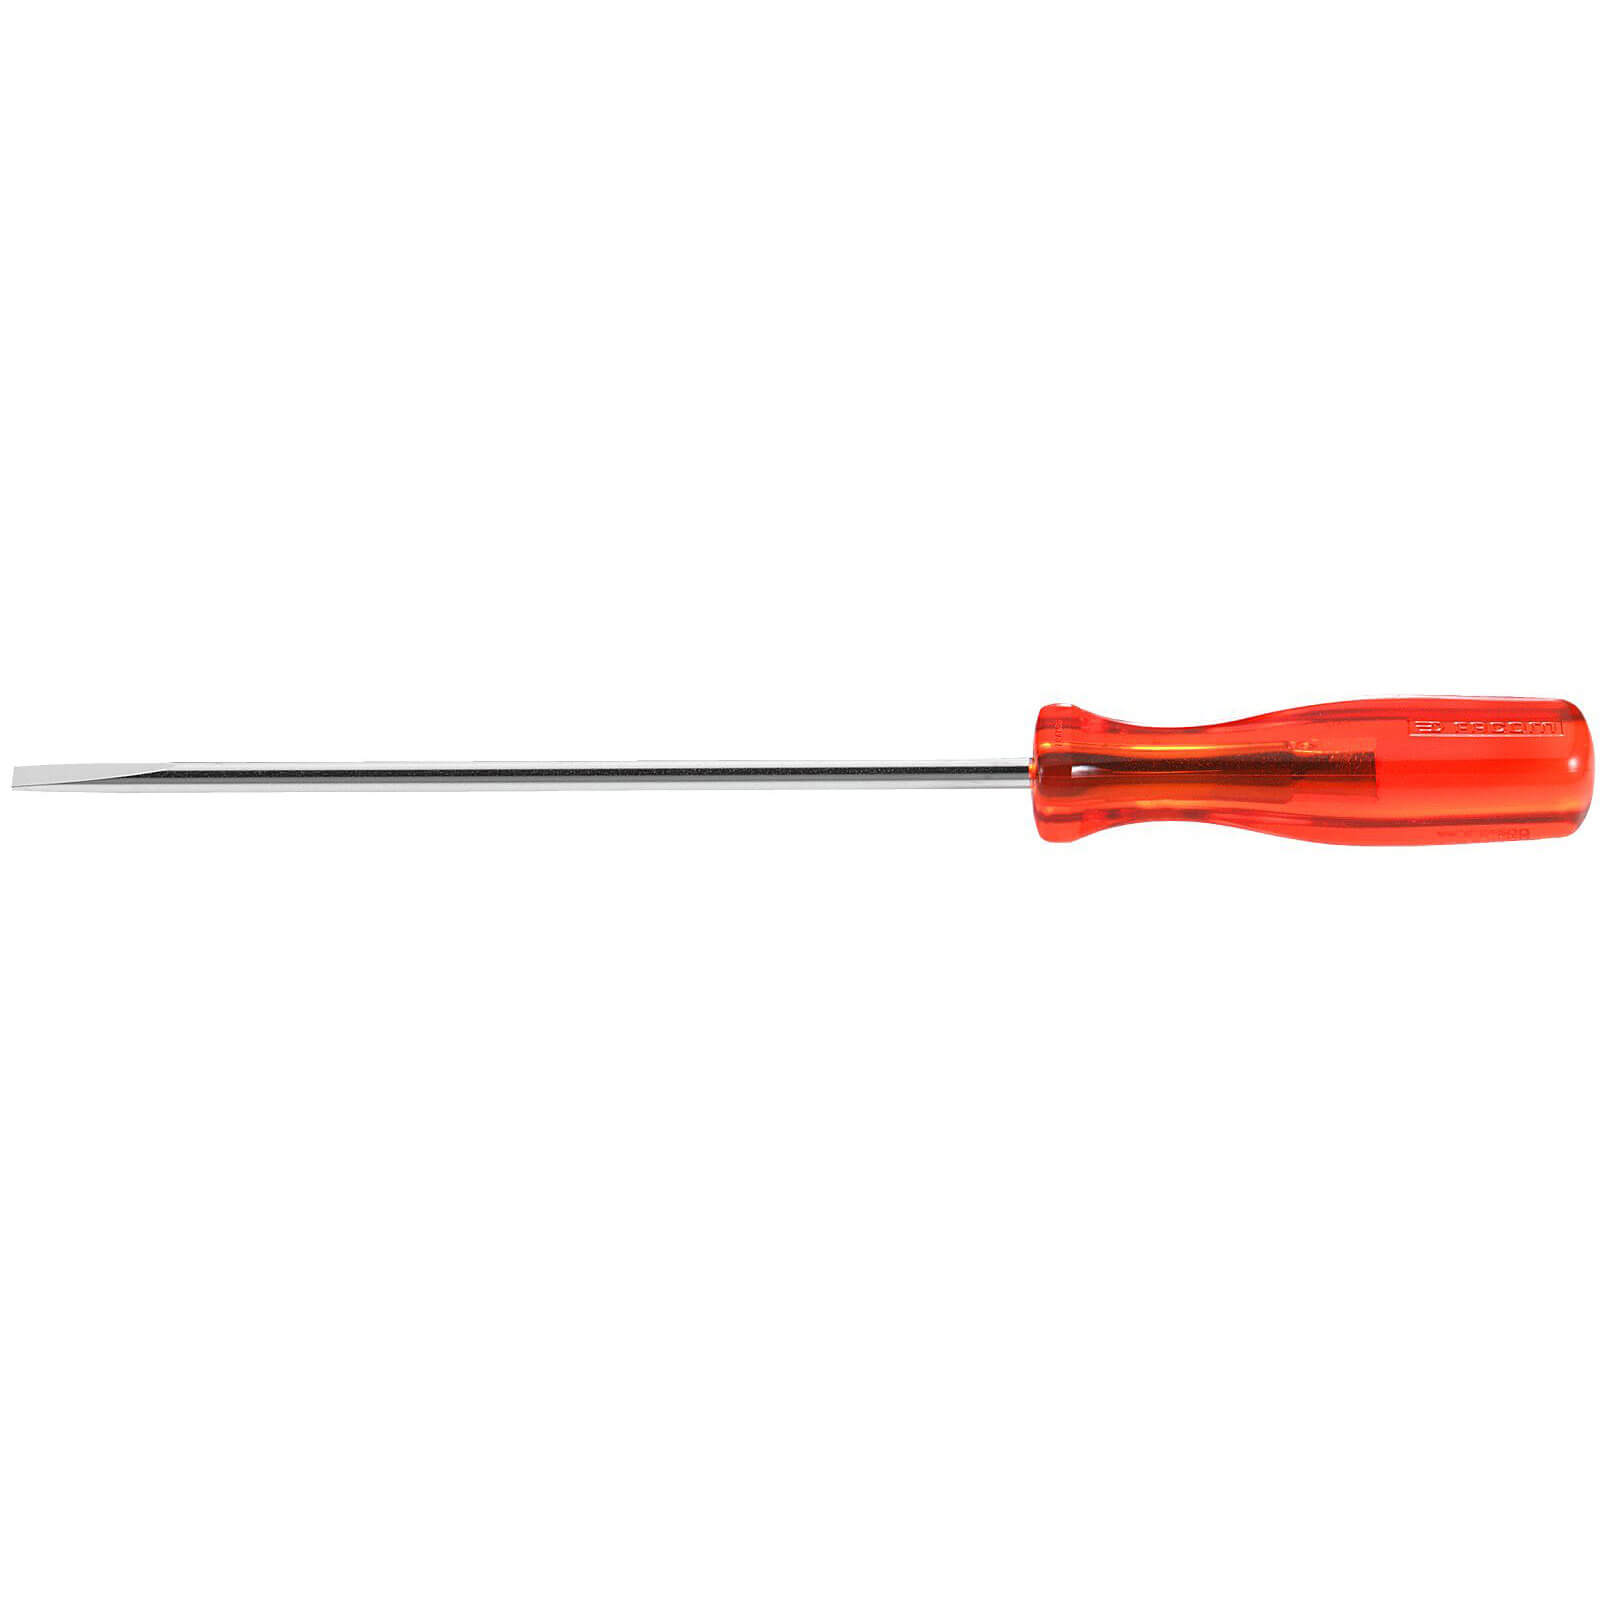 Image of Facom Isoryl Parallel Slotted Screwdriver 3.5mm 100mm